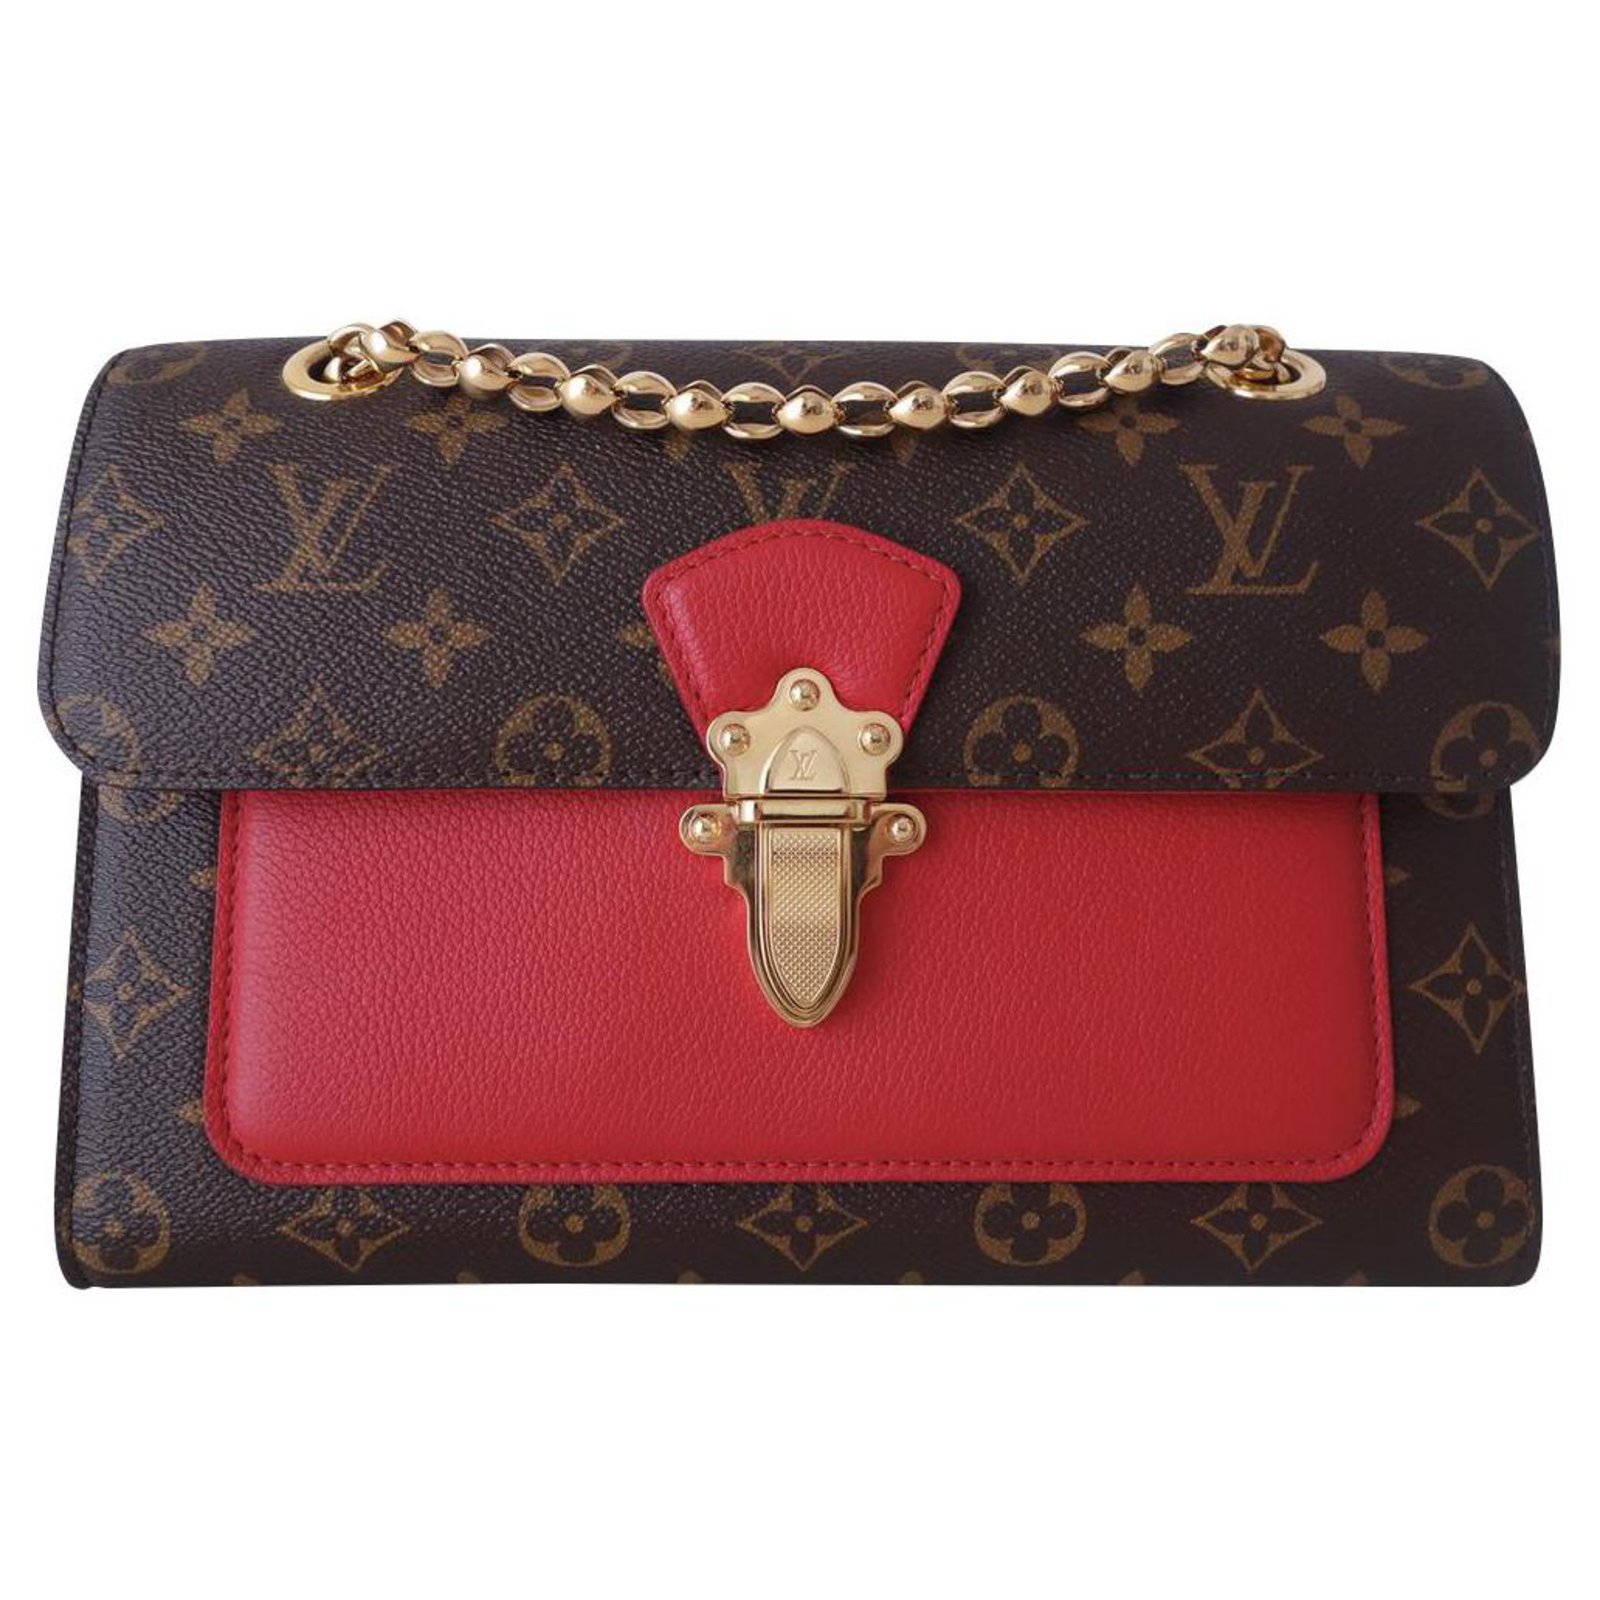 Louis Vuitton VUITTON VICTORY BAG Brown Red Leather Cloth ref